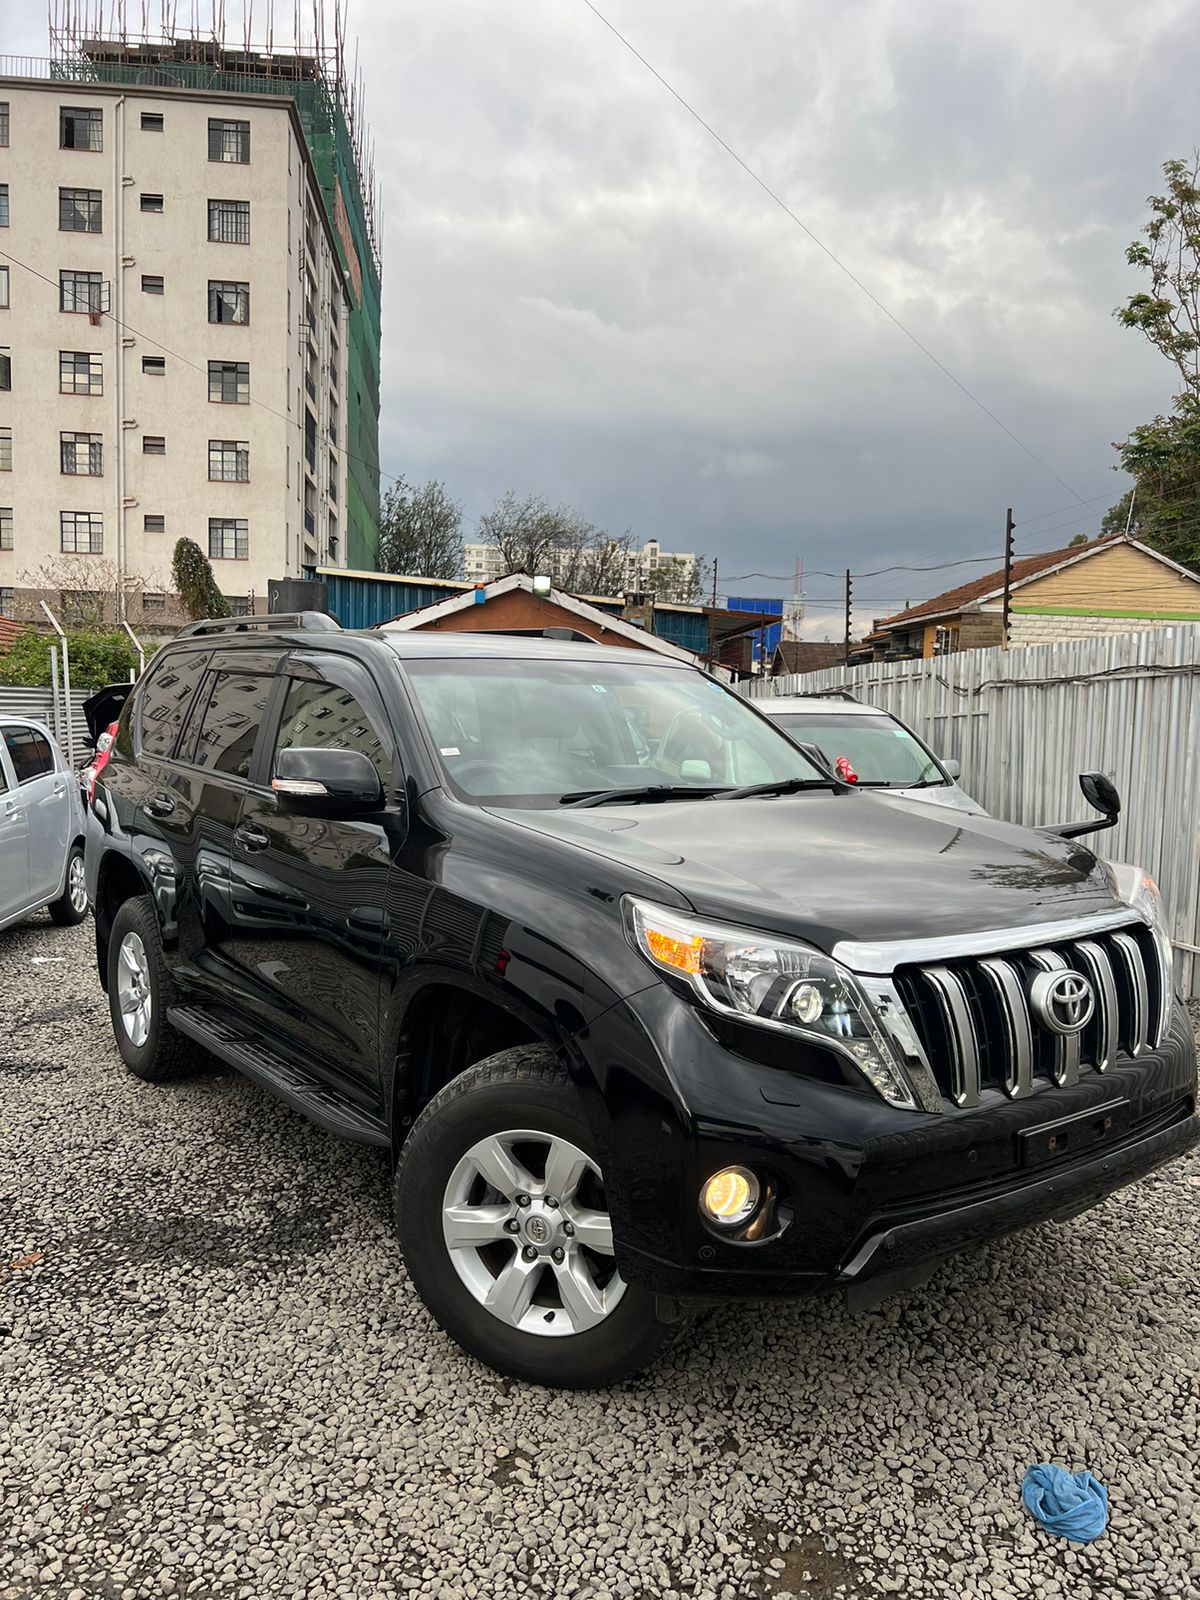 Toyota Prado 2015 4.9M ONLY JUST ARRIVED Trade in OK